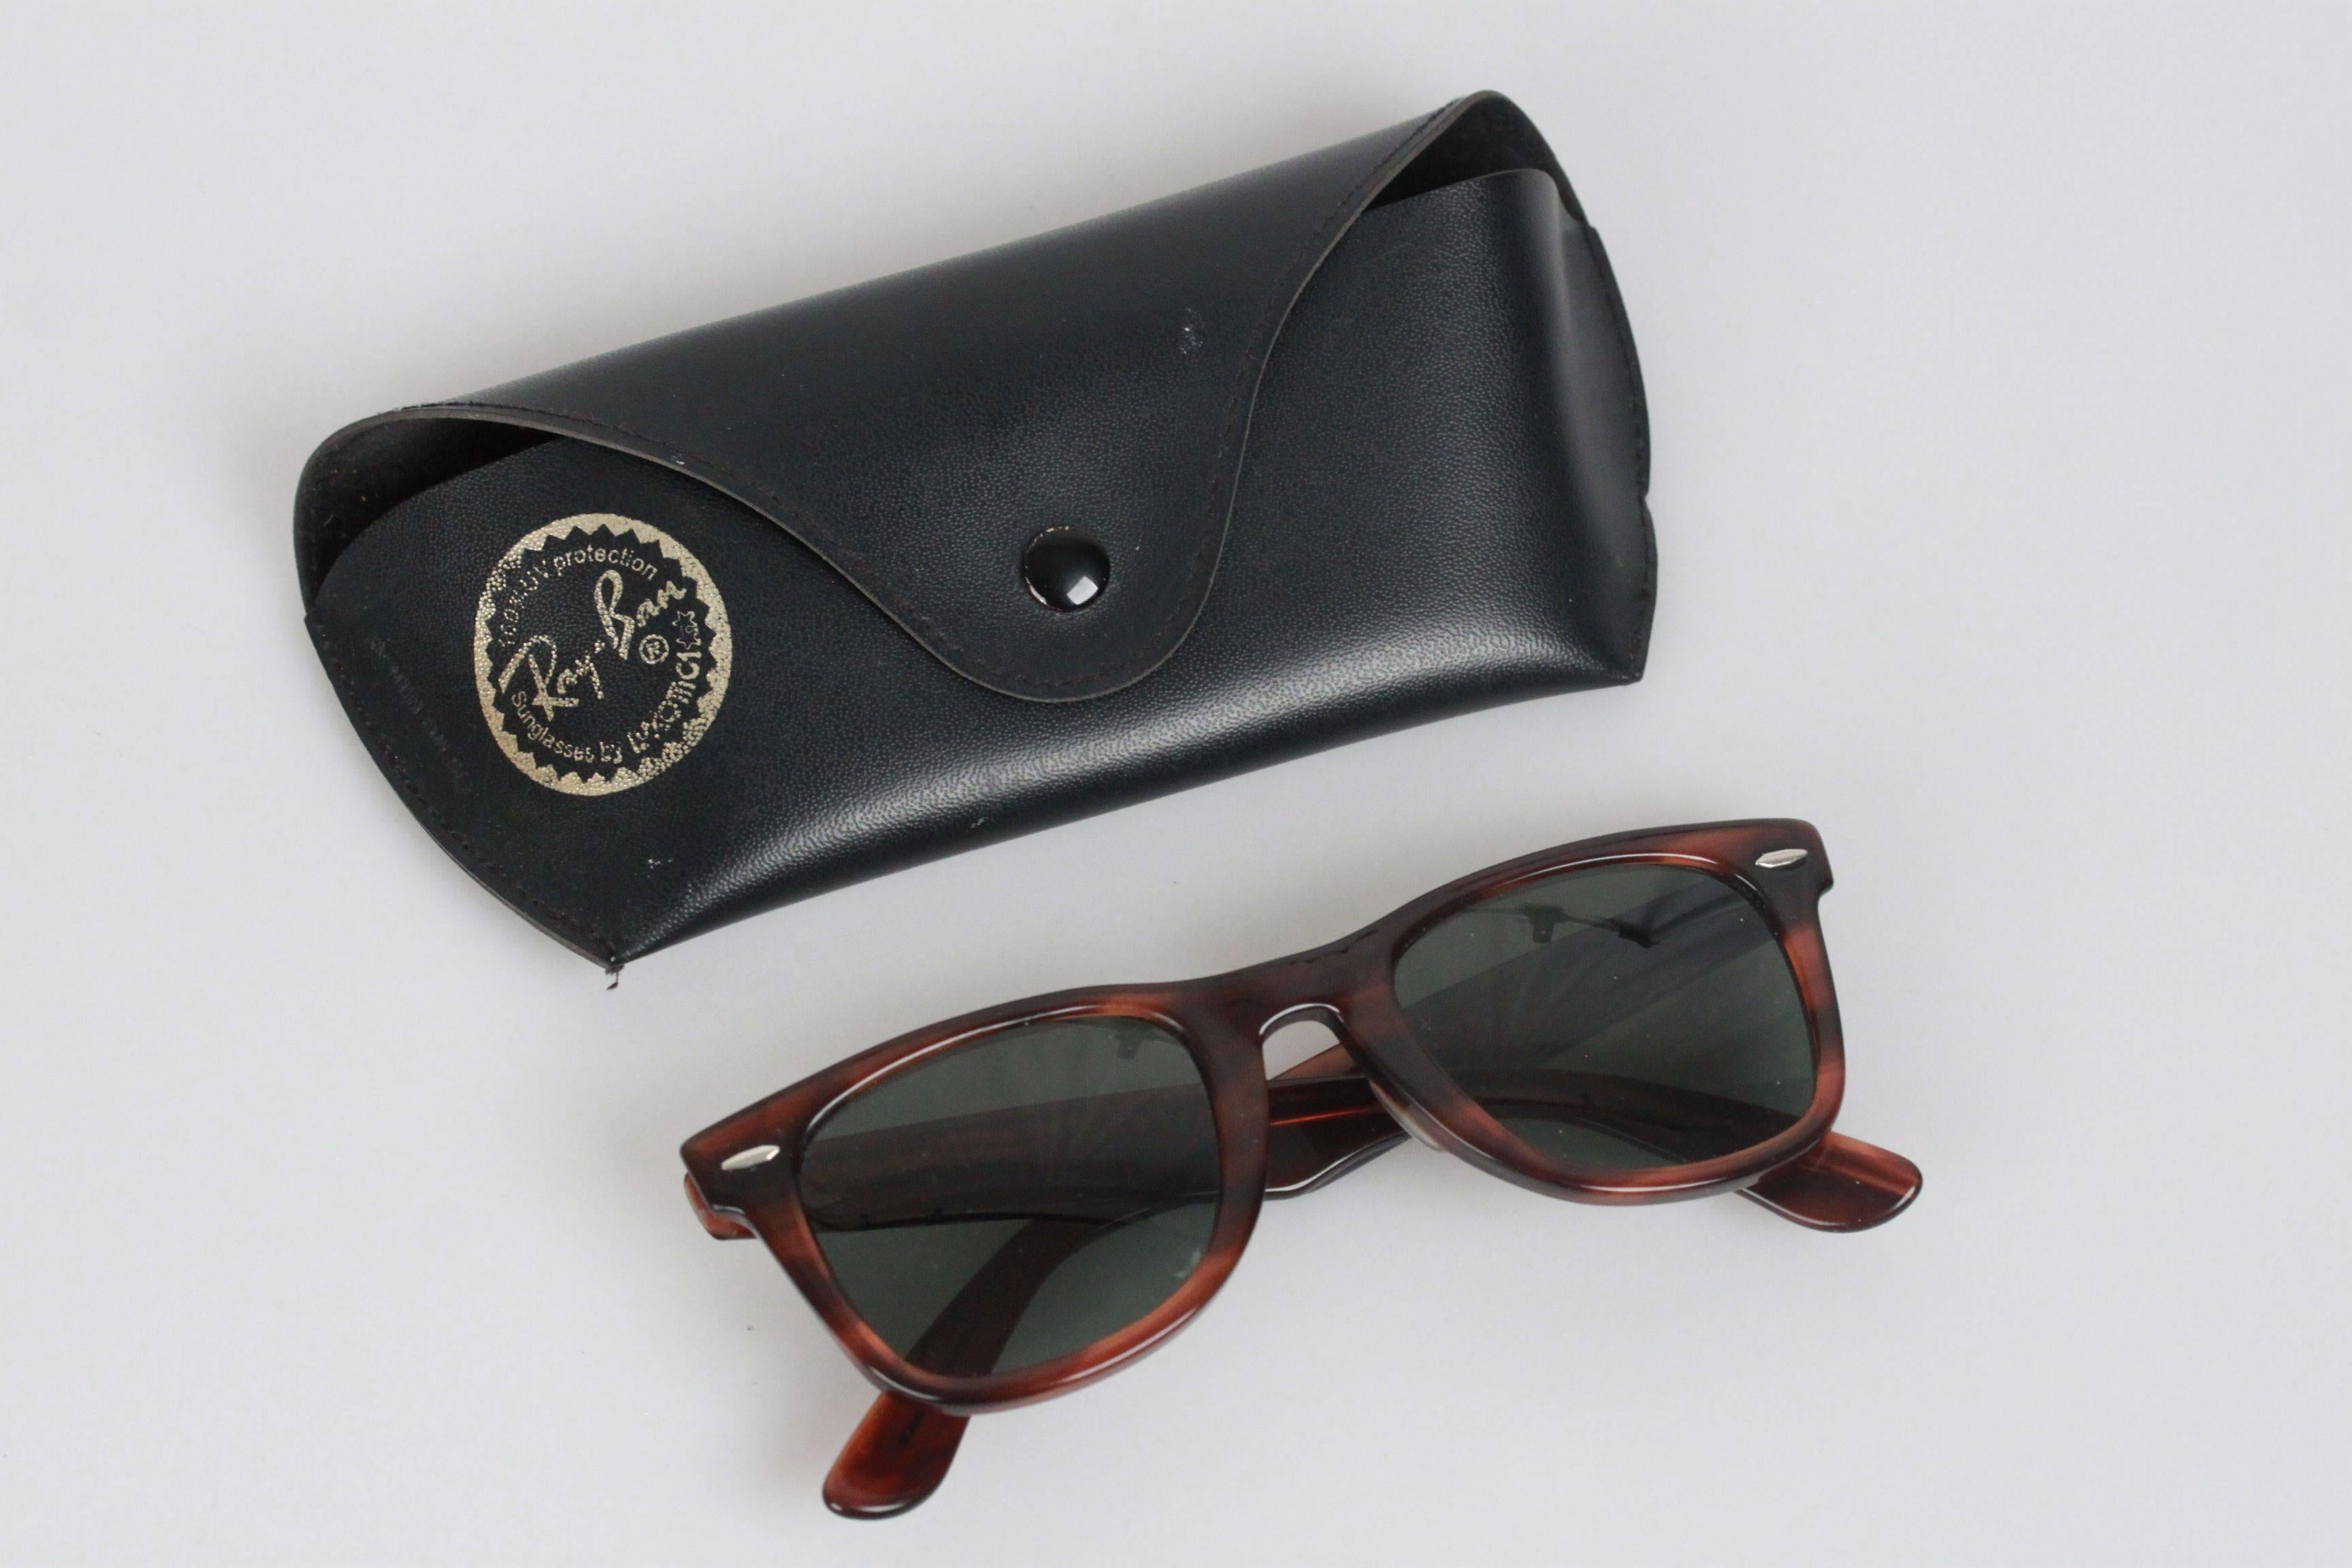 - Legendary vintage sunglasses by Ray-Ban Bausch & Lomb, mod.WAYFARER, B&L5024
- Brown acetate frame
- Original BAUSCH & LOMB green lenses (BL logos on temples)
- They will come with a RAY BAN case

Any other detail which is not